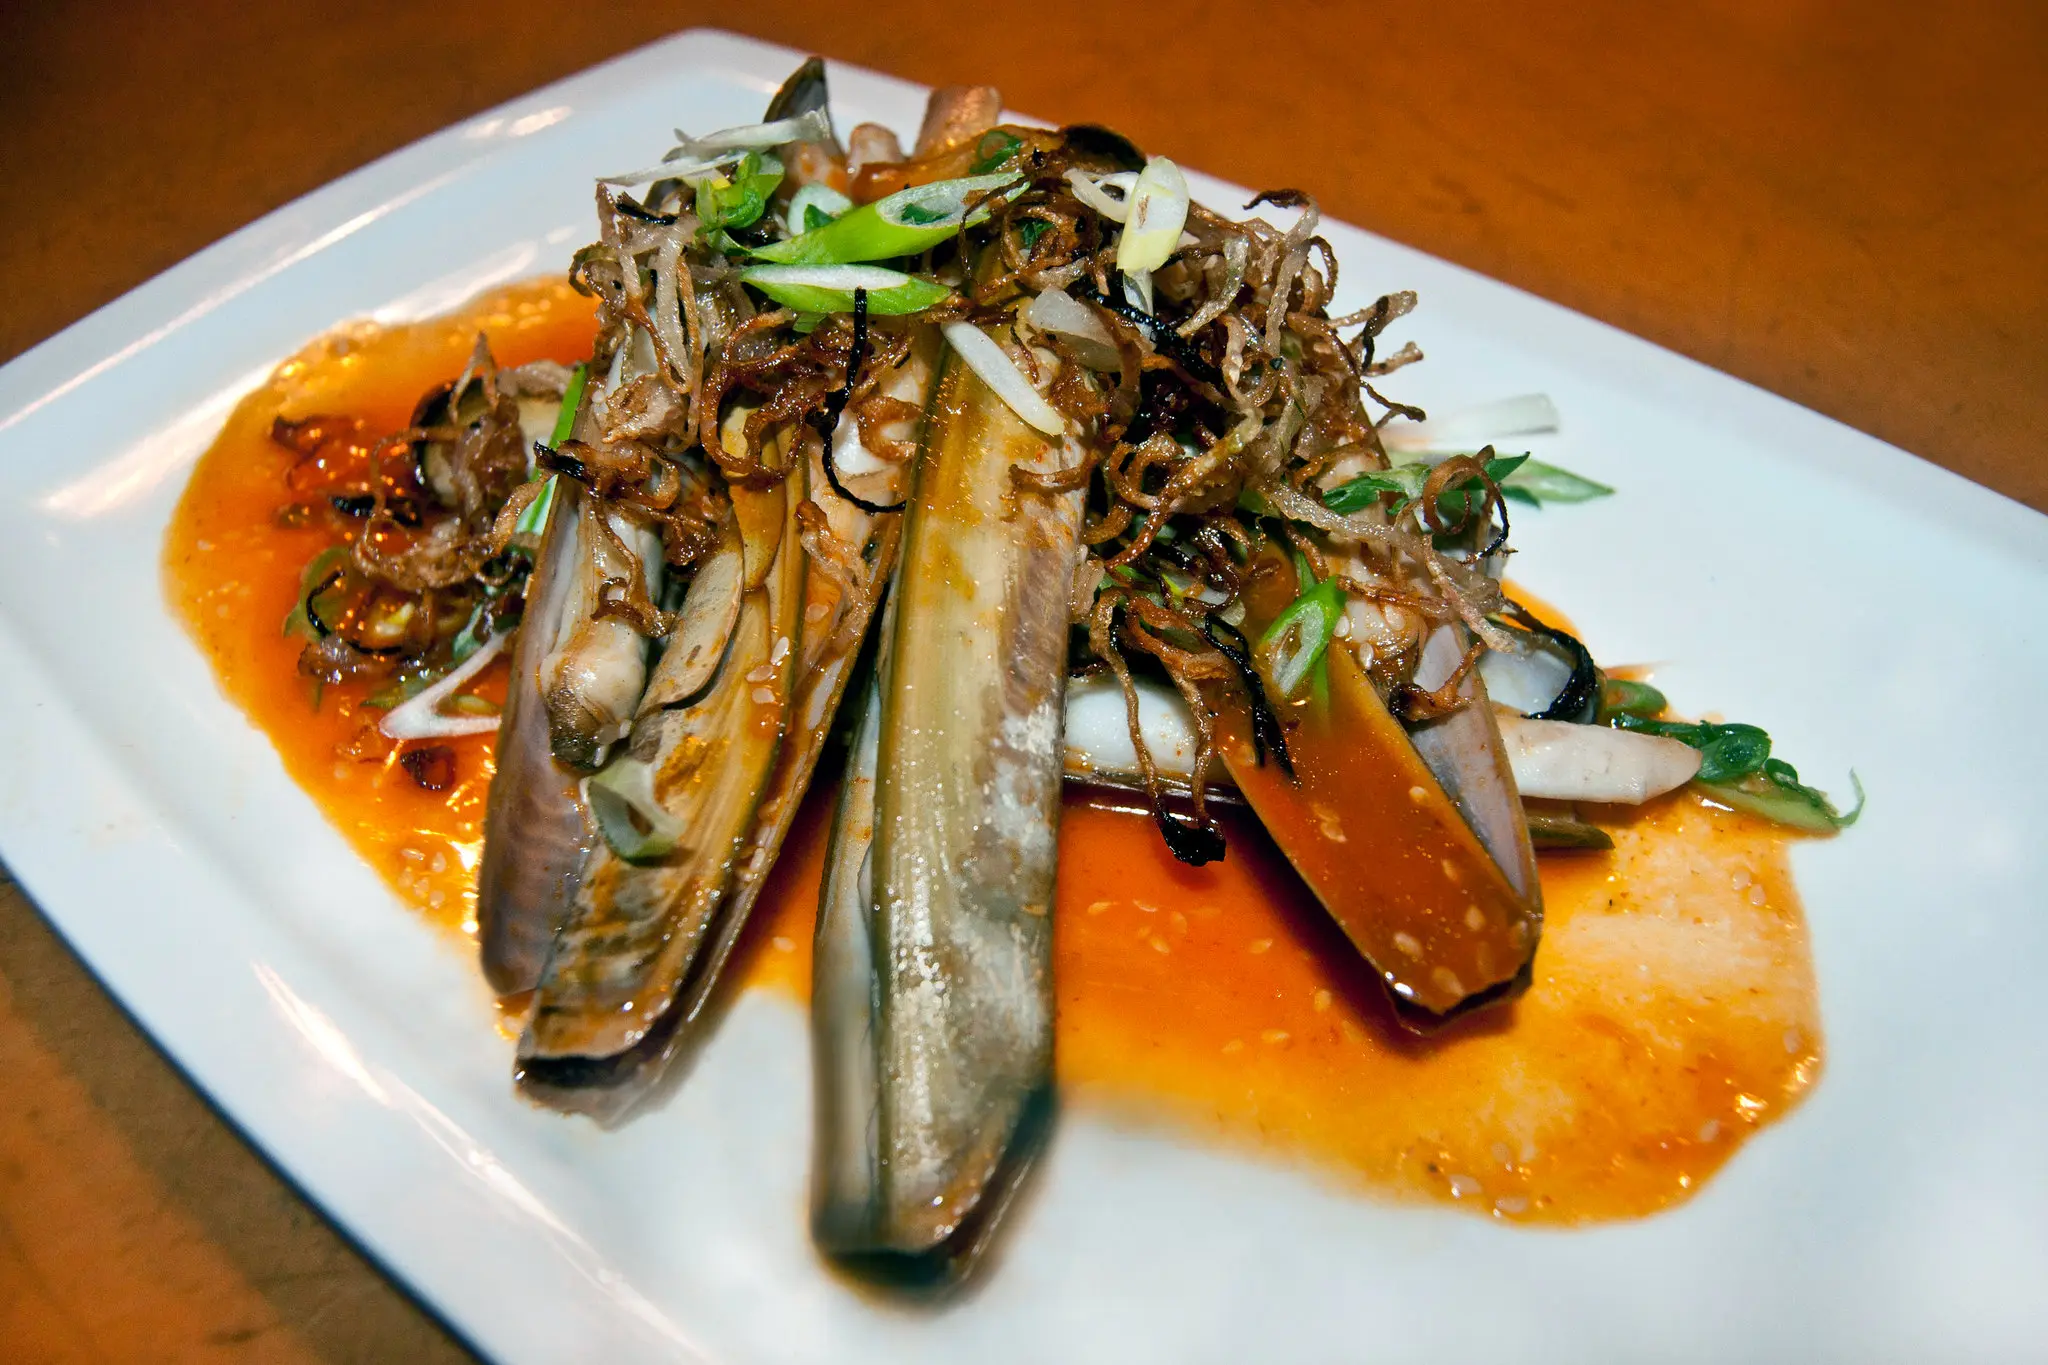 smoked razor clams recipe - What is the best way to eat razor clams